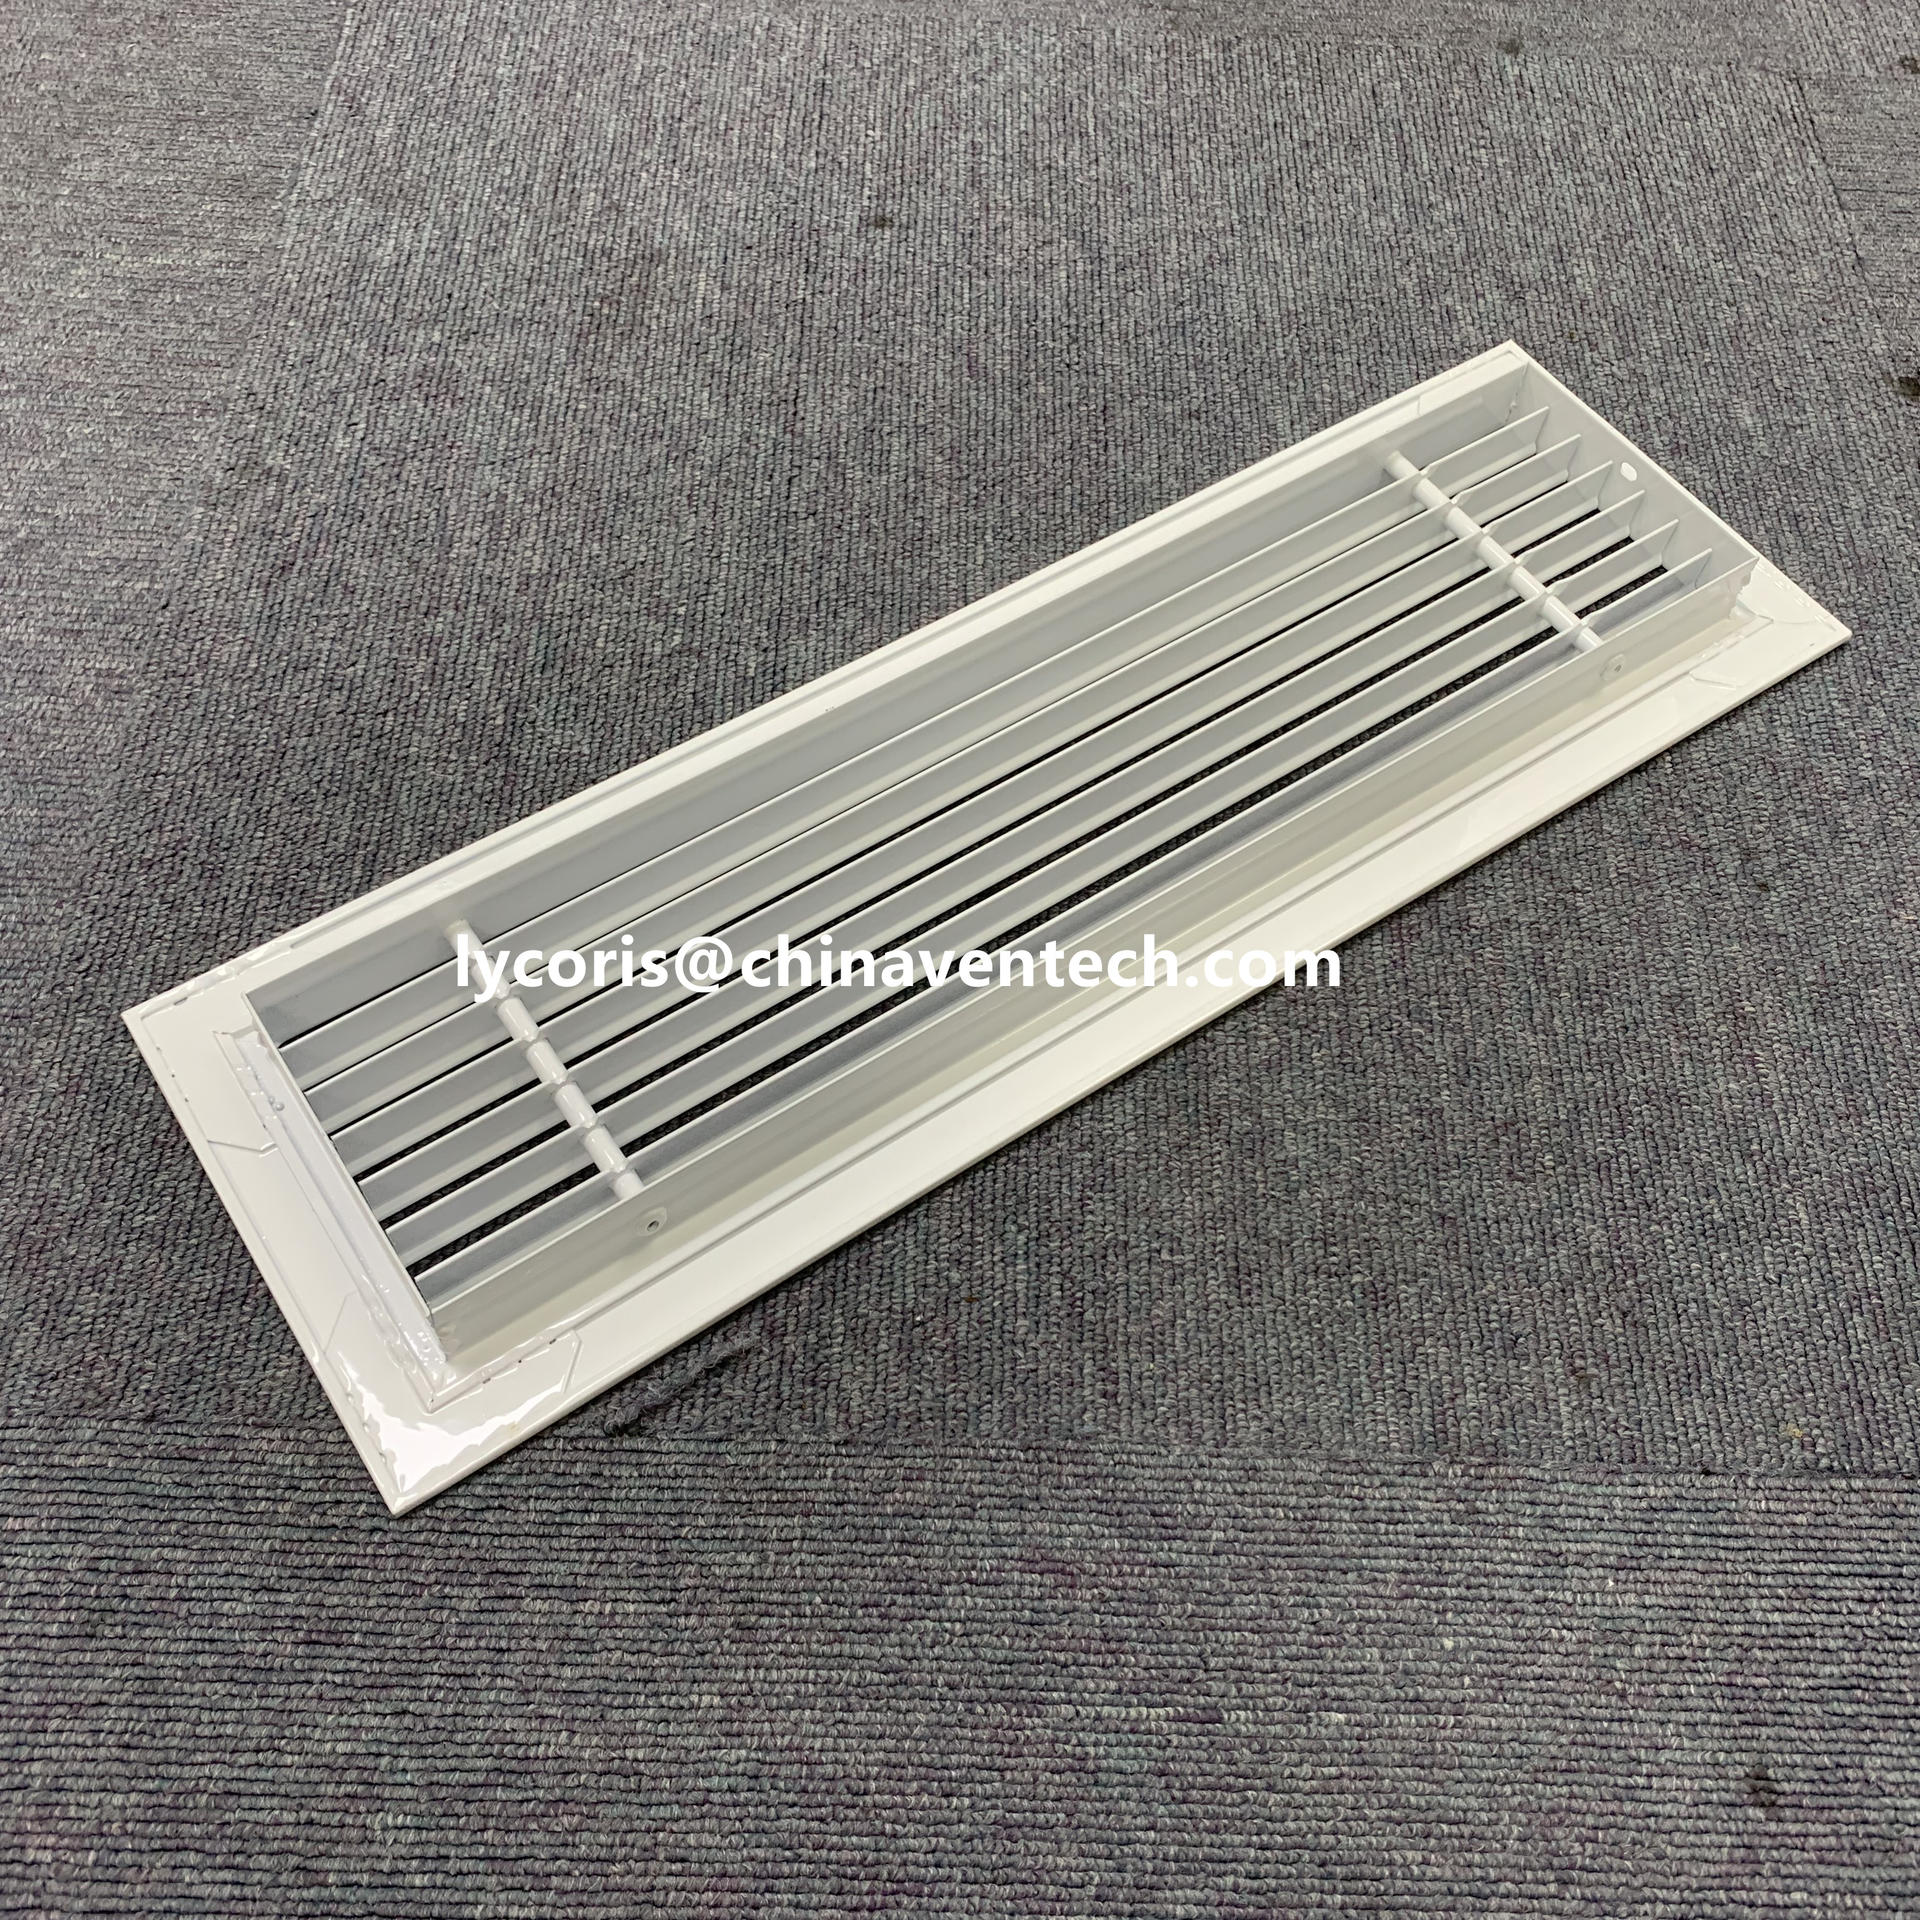 fixed blades aluminum air grille hvac linear bar grille